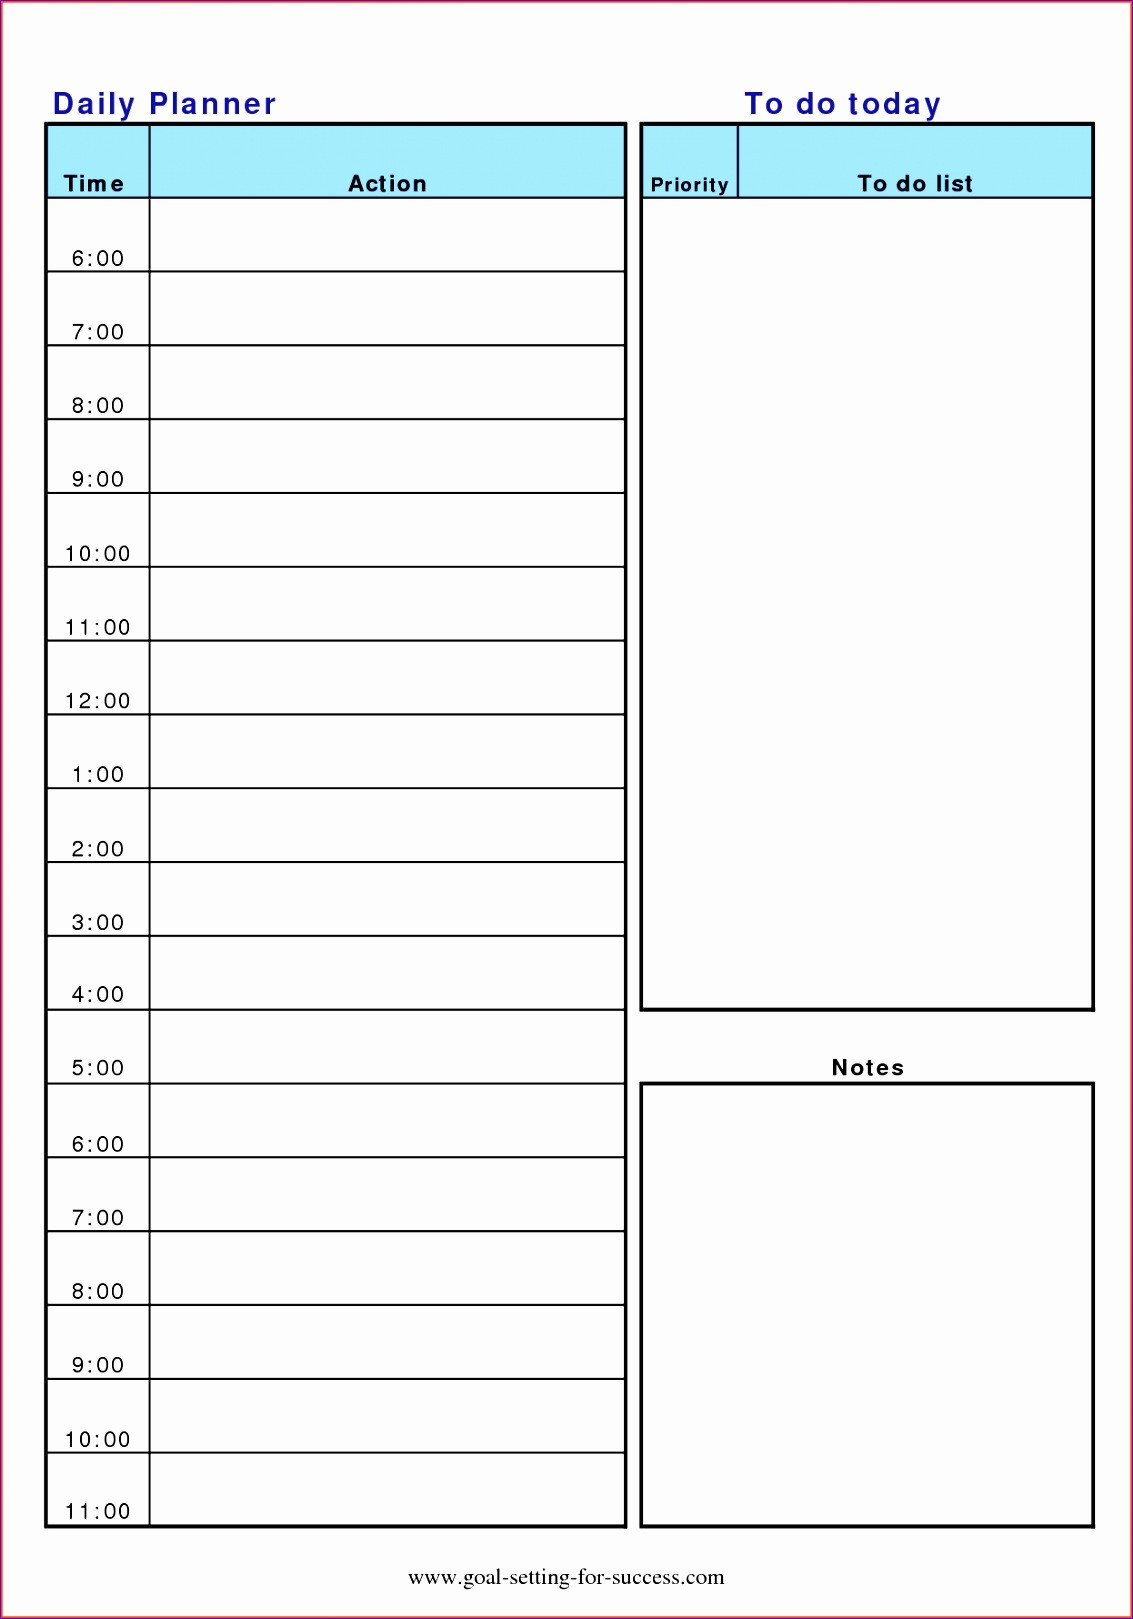 Daily Calendar Template Excel 8 Daily Planner Excel Template Excel Templates Excel